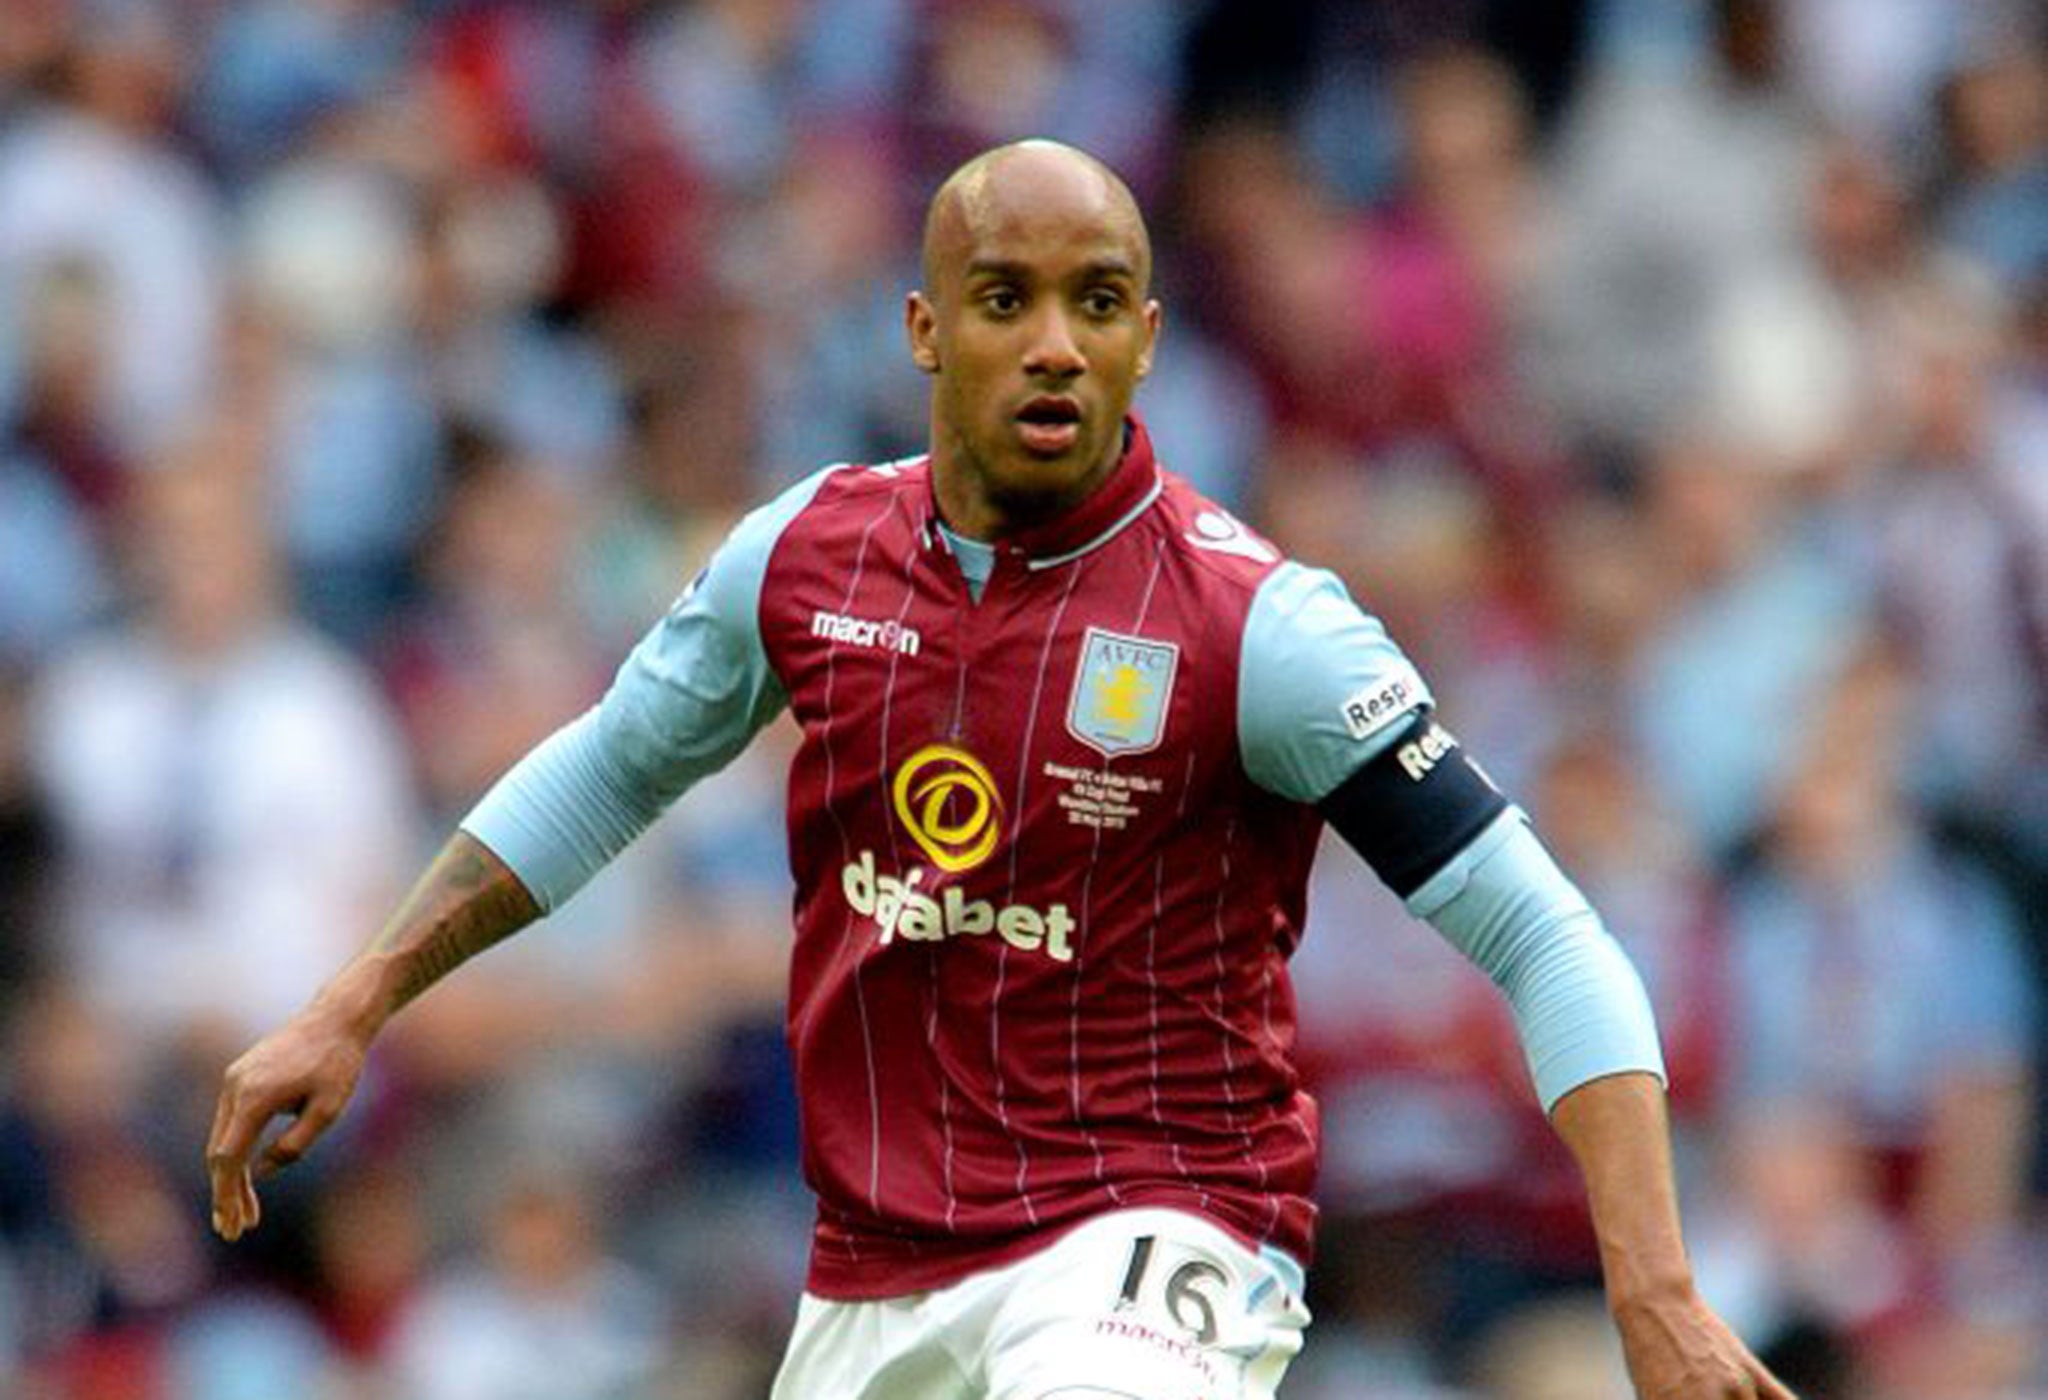 Fabian Delph was the subject of much ire from Aston Villa fans after he left the club to join Manchester City